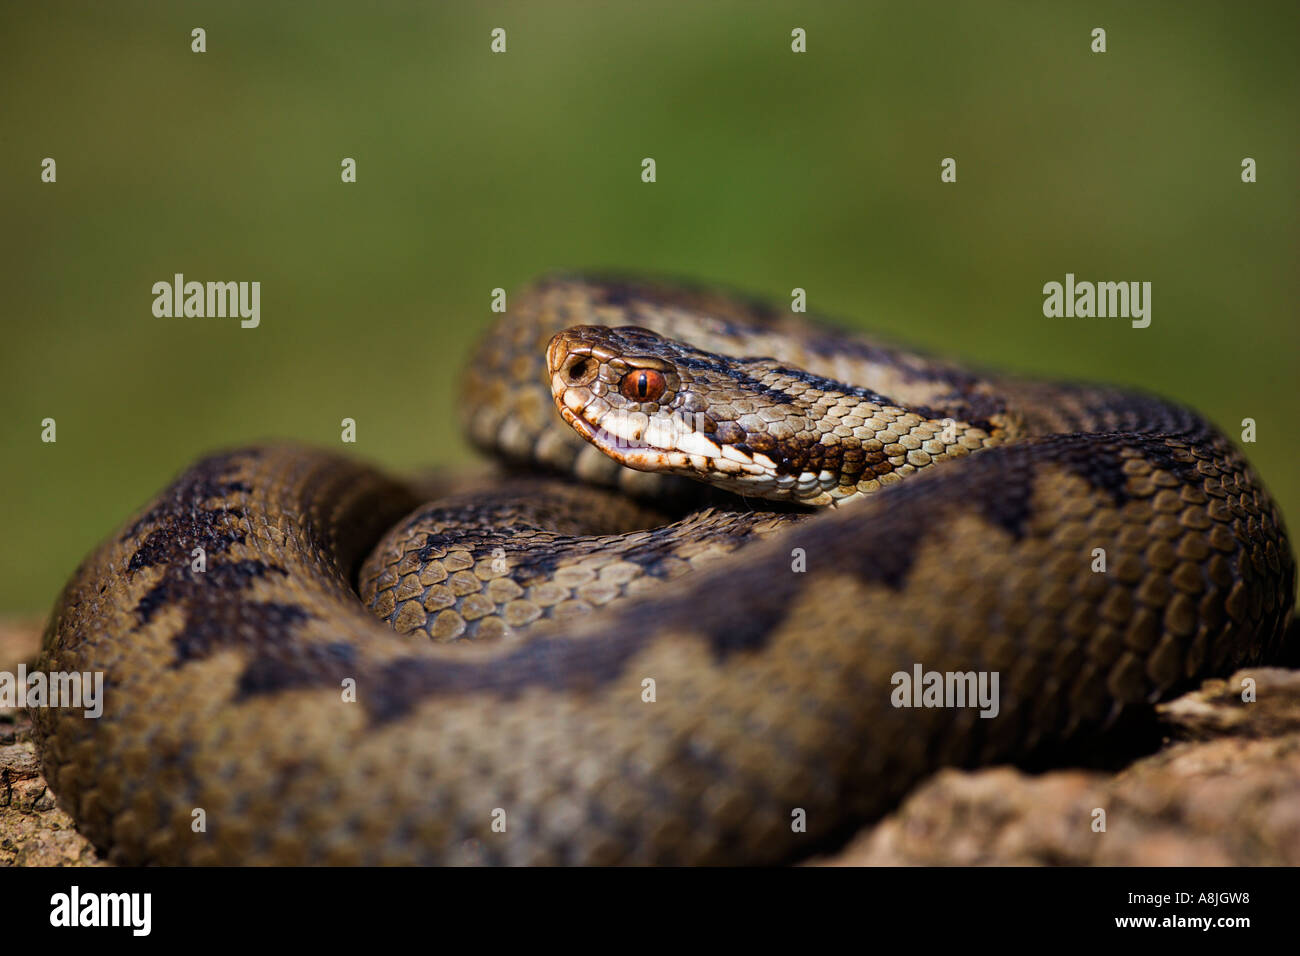 Adder Vipera berus on log looking alert ready to strike leicestershire with nice out of focus background Stock Photo